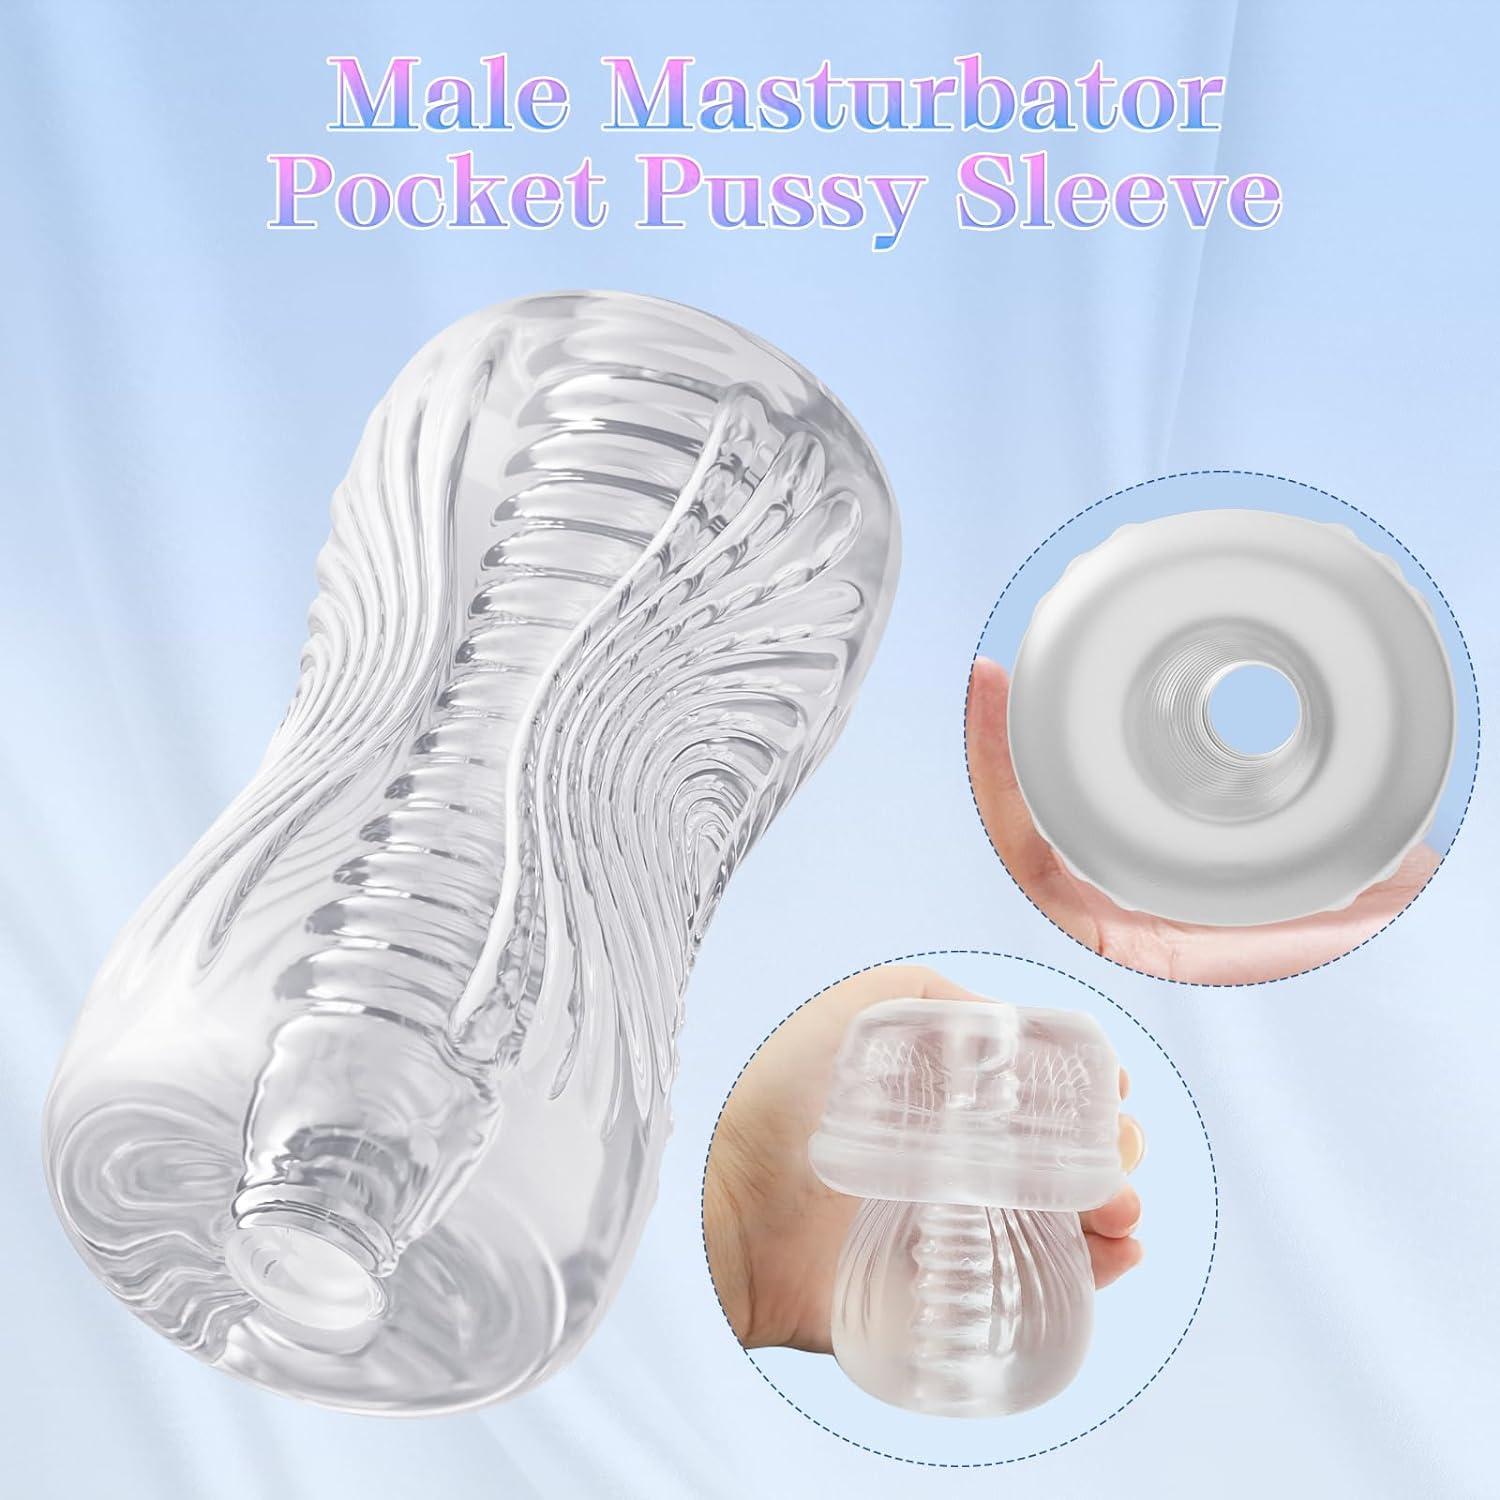 hnrifc Male Masturbator Stroker, Sex Toys for Men, Adult Sex Toy Pocket Pussy, TPE Male Masturbation Sleeve, Penis Training for Men, 3D Realistic Texture Spiral Tunnel, Couple Sex Toy & Game